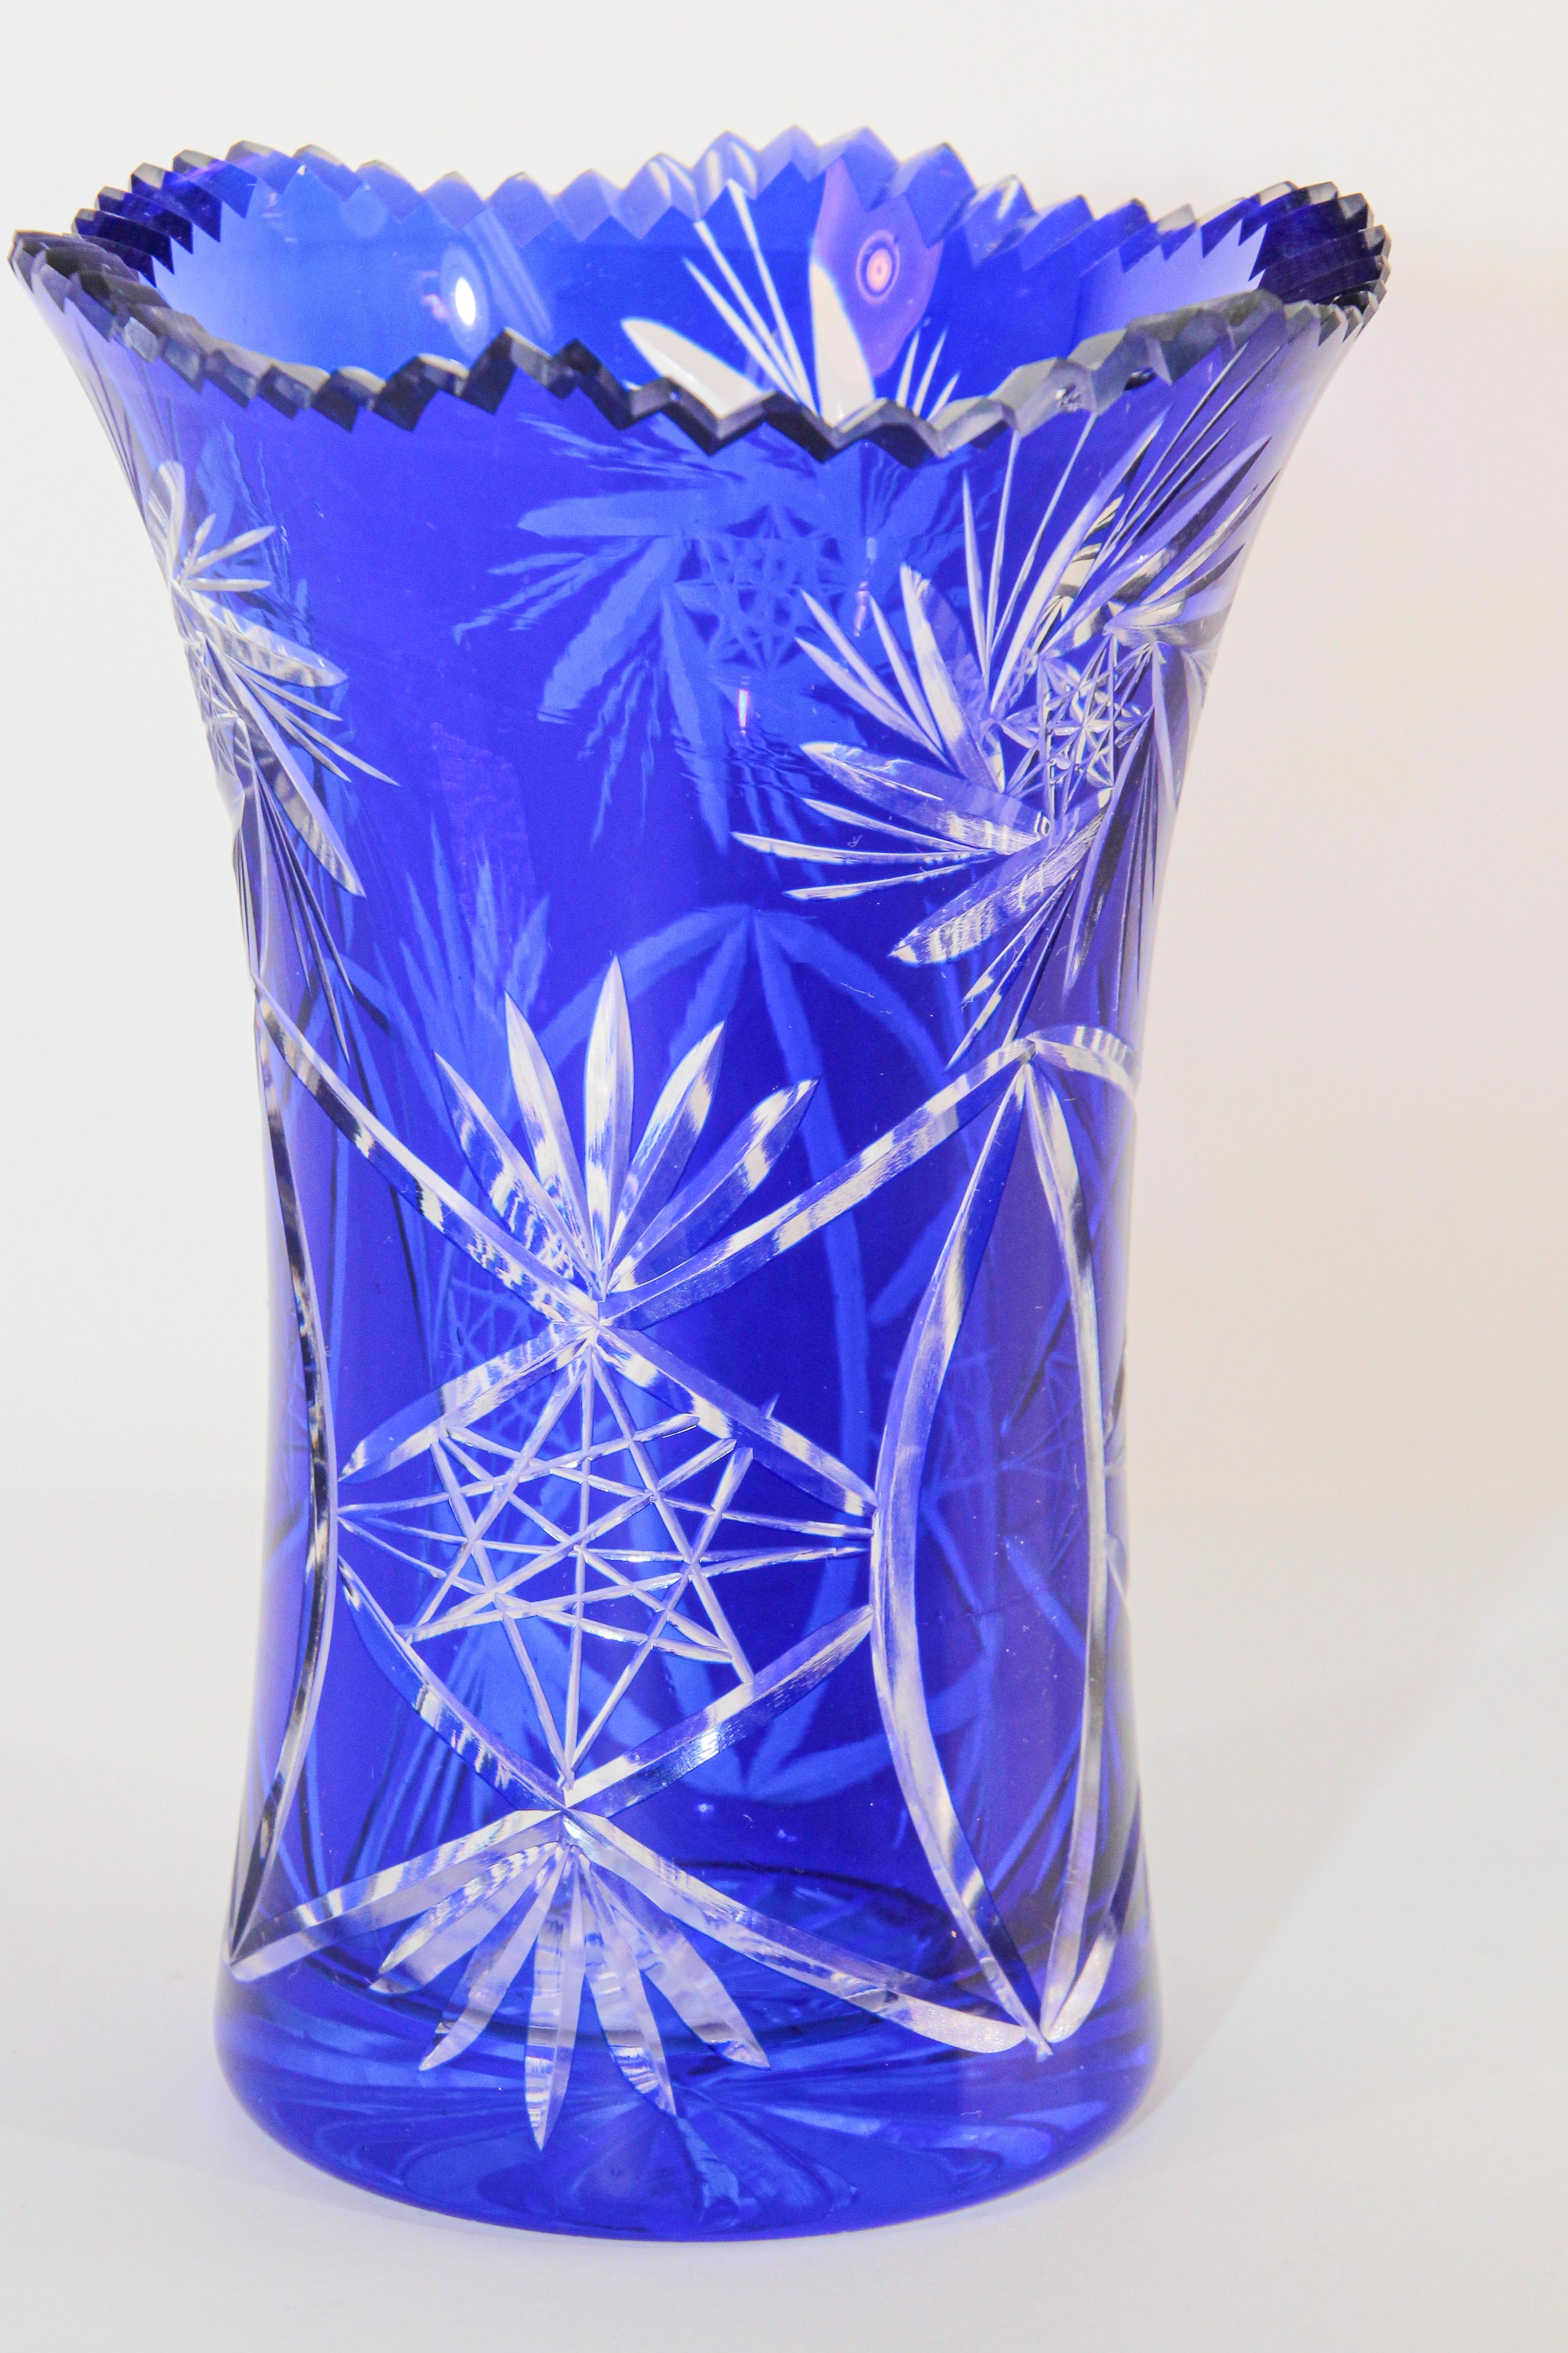 Cobalt blue cut to clear Bohemia art glass crystal vase.
A beautiful piece with cut details from top to bottom, cut to clear, cobalt blue Bohemian glass vase from Czechoslovakia. 
Vintage cobalt blue Bohemian art glass with diamond pattern with a